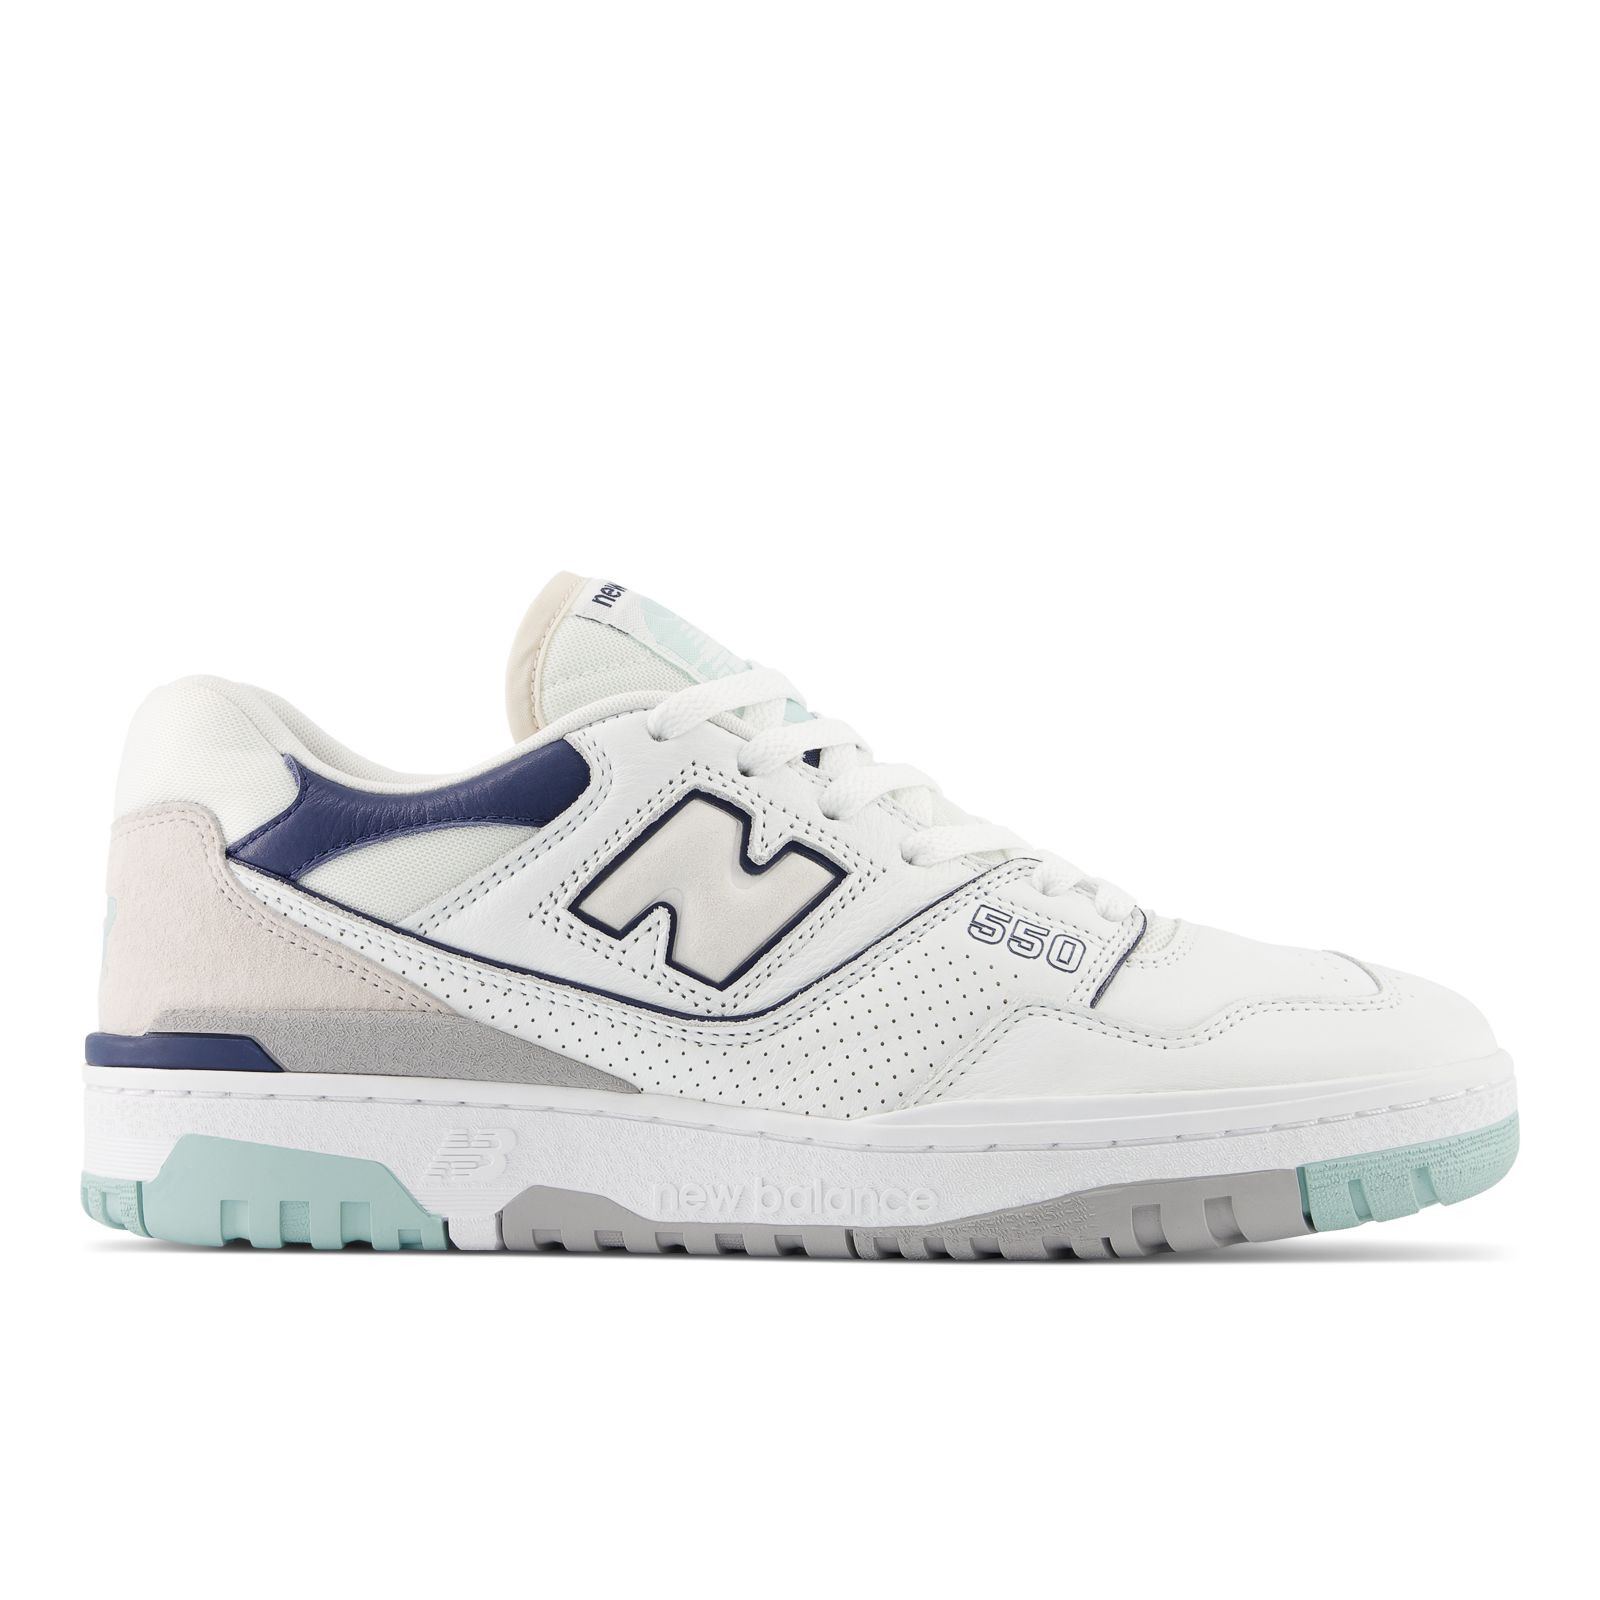 New Balance 550 white green size Men 4.5 Fits Womens US 6 100% Authentic